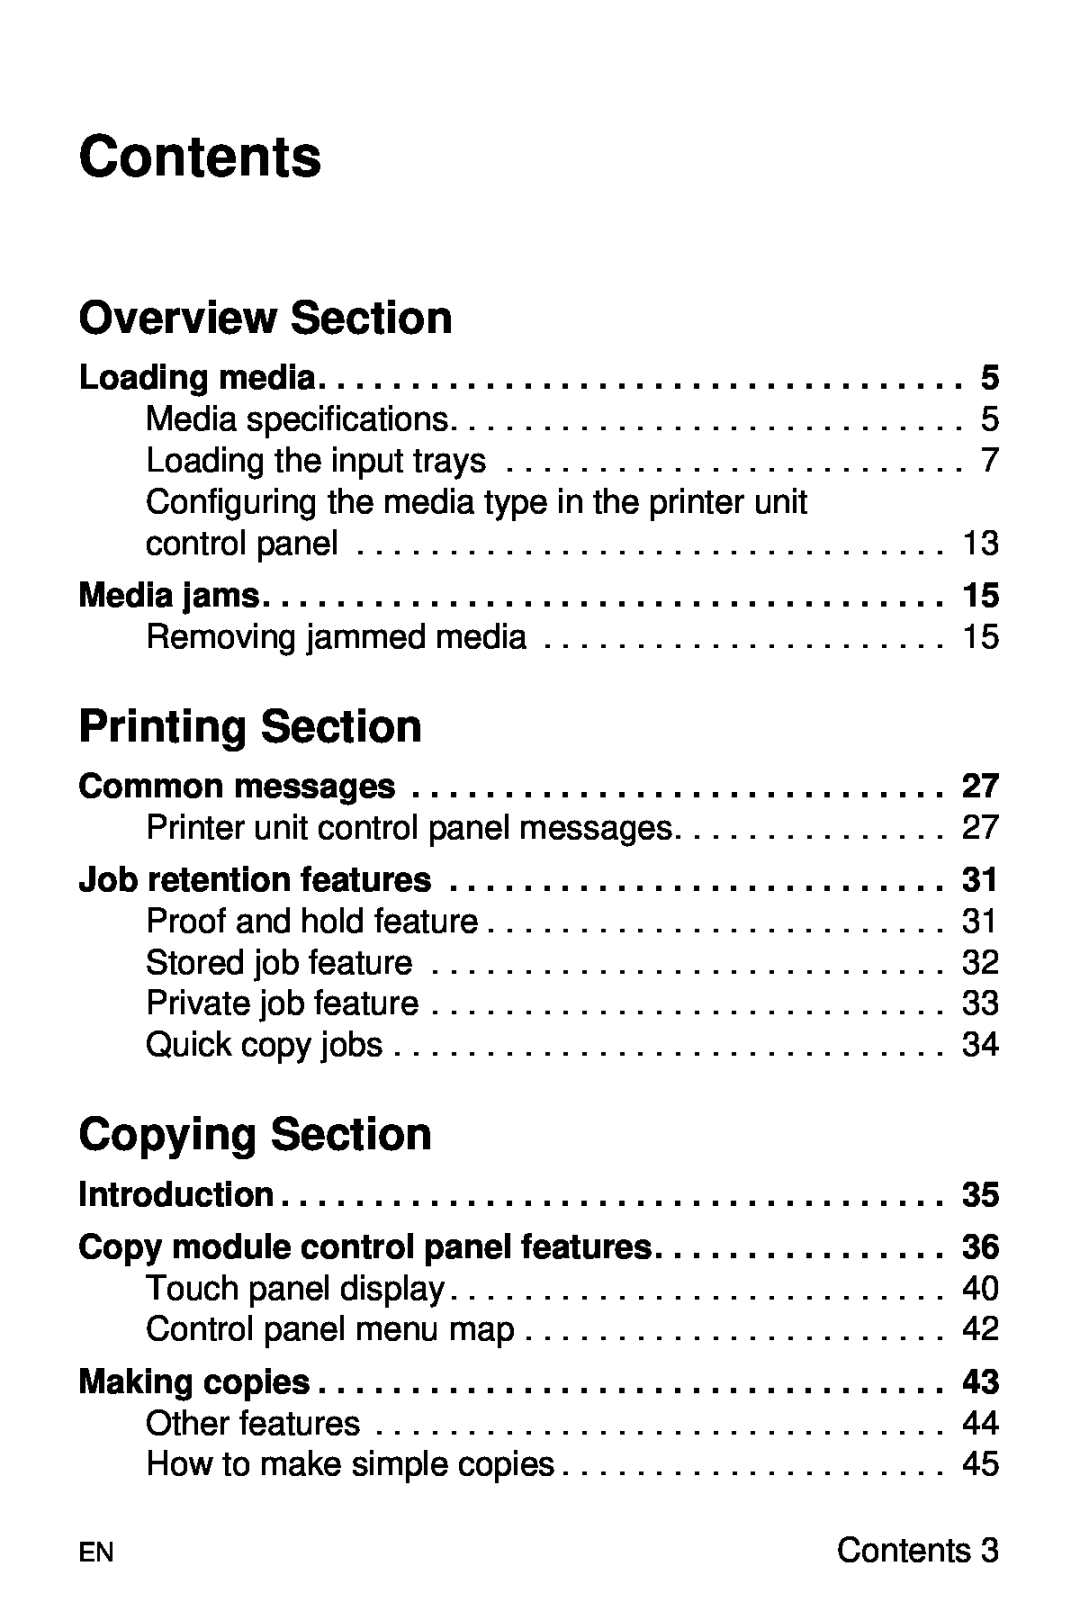 HP 8000 s Overview Section, Printing Section, Copying Section, Loading media, Media jams, Common messages, Making copies 